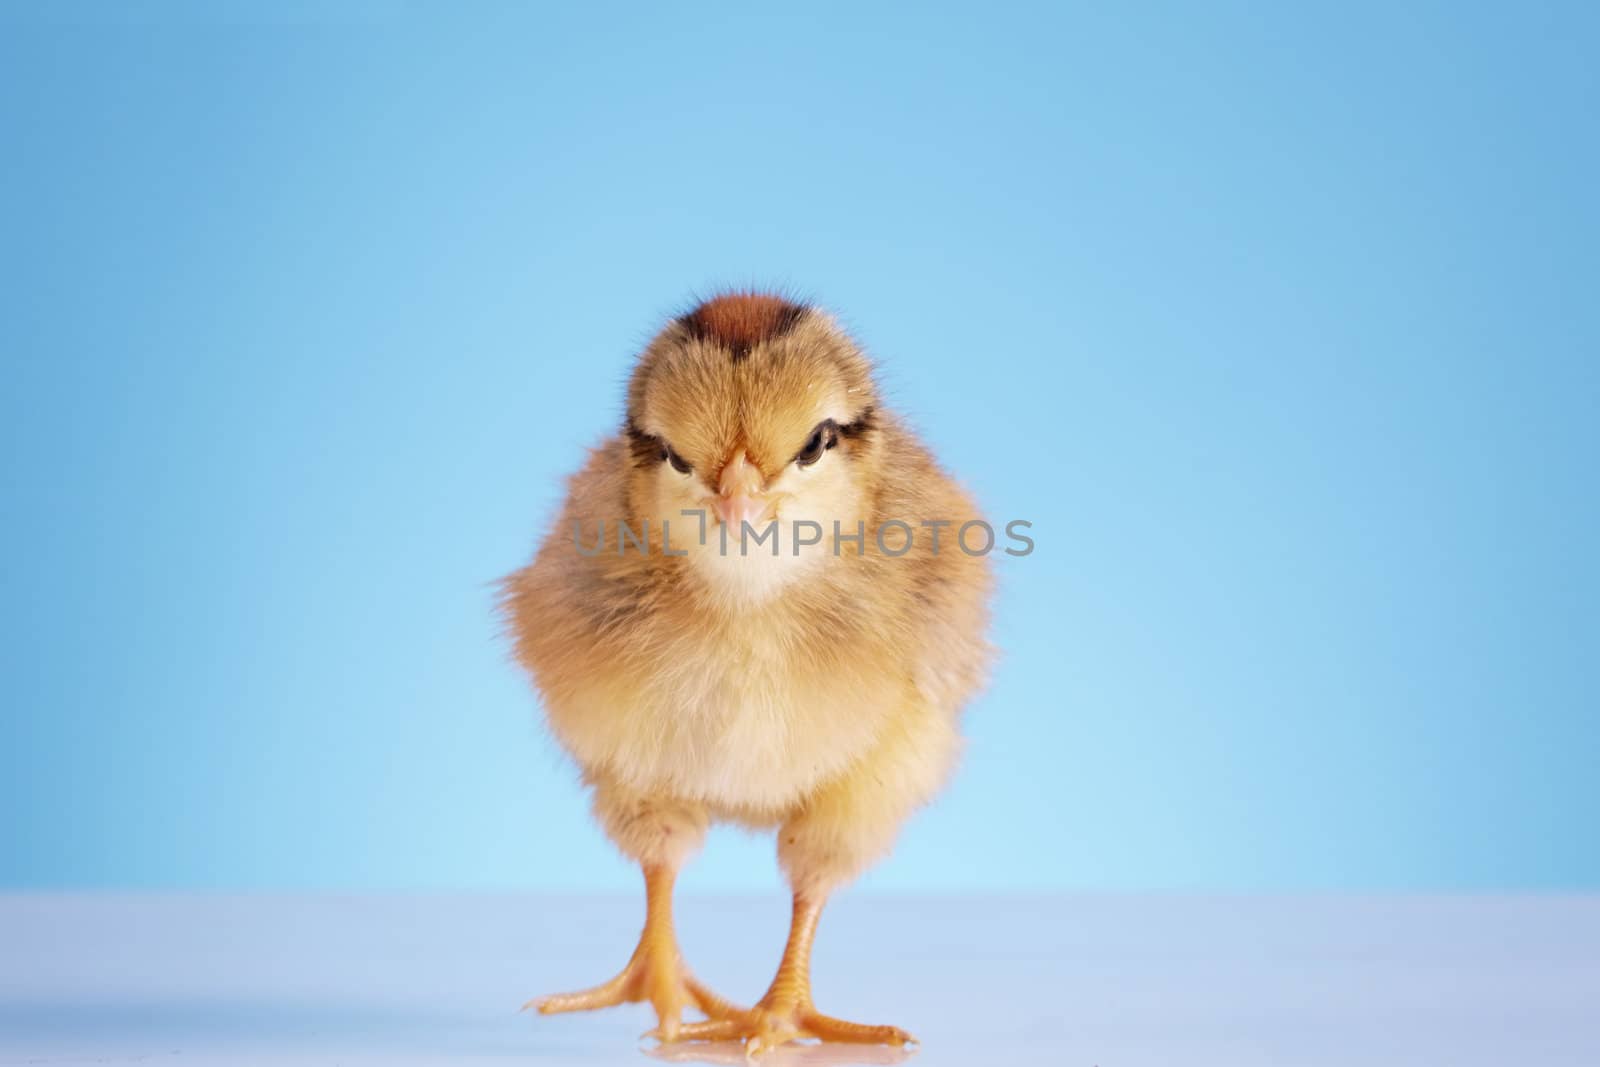 little chicken on a blue background by qazxcde105000